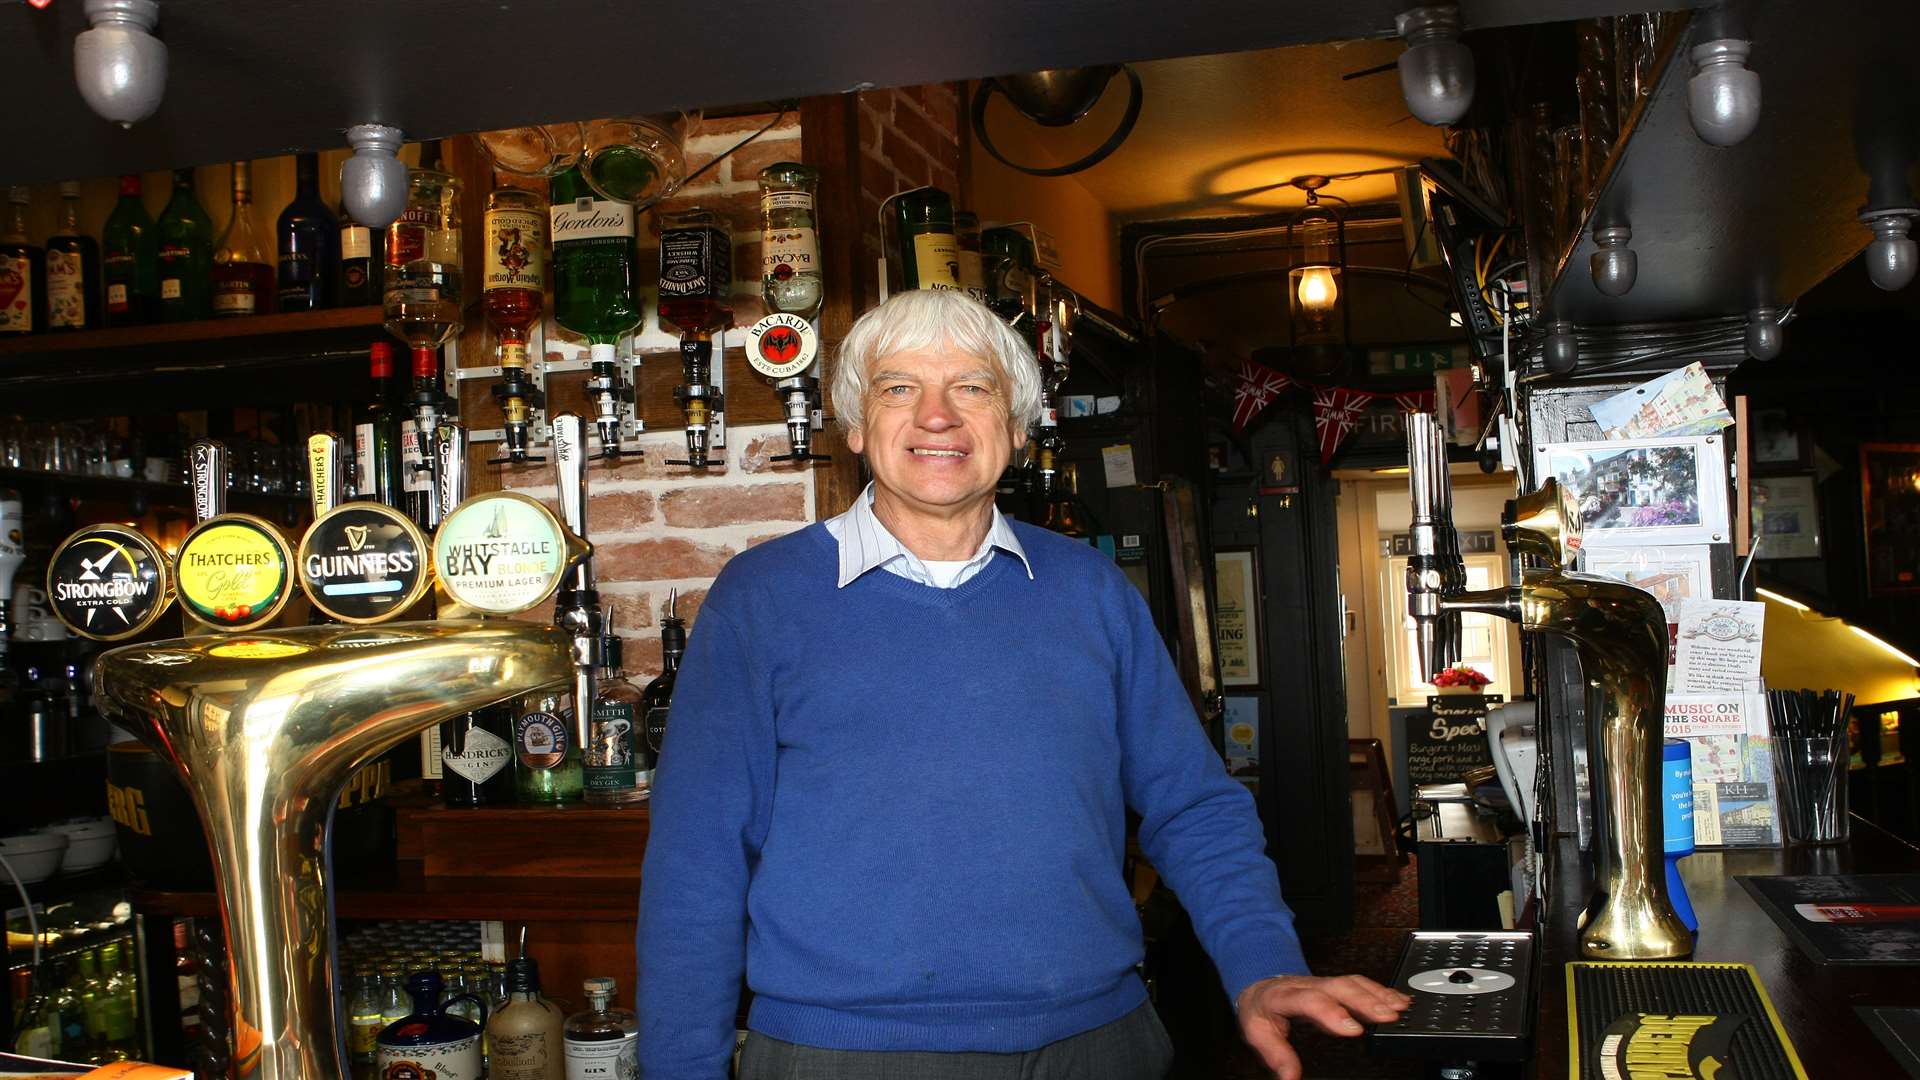 The outside performance area by the KKing's Head, Port Arms and Dunkerley's is doggie friendly. Pictured Graham Styles, landlord of the King's Head public house.